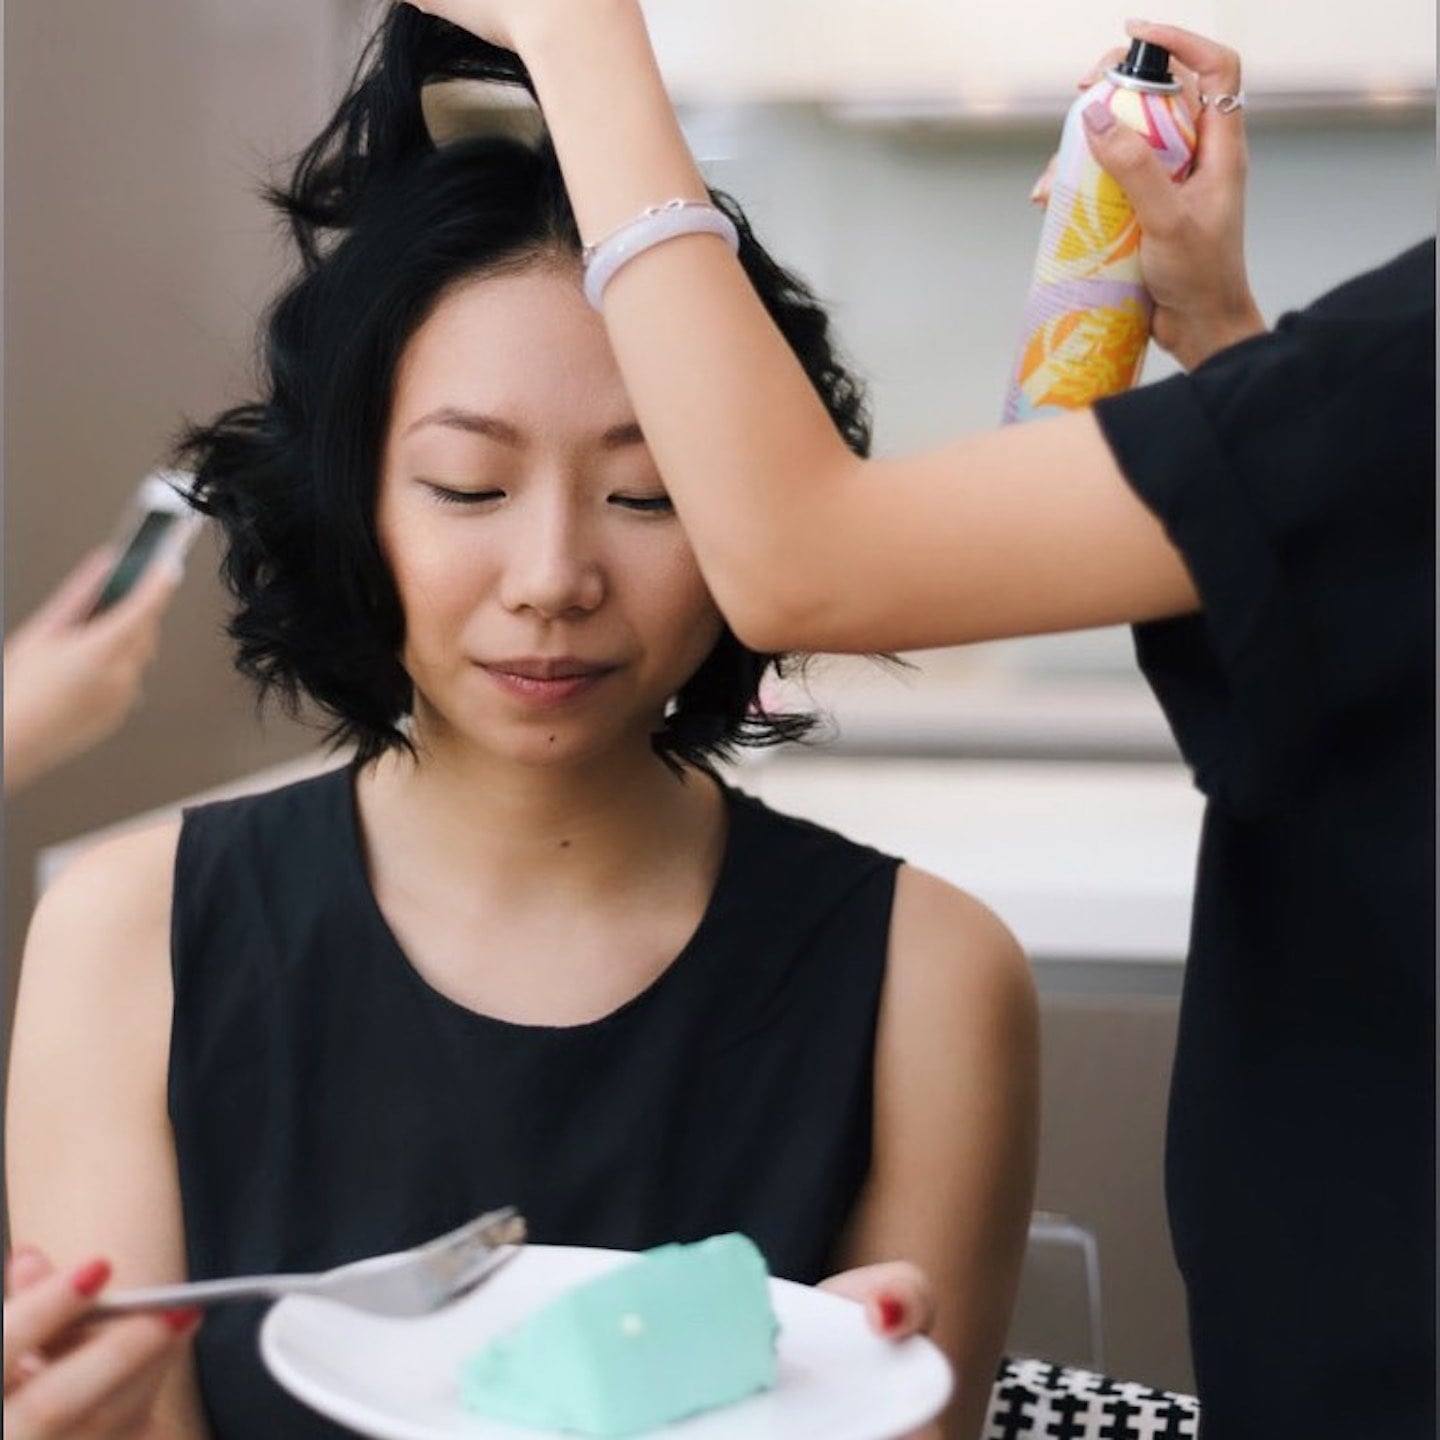 Home Beauty Services To Try Now: Hair, Makeup & Massages